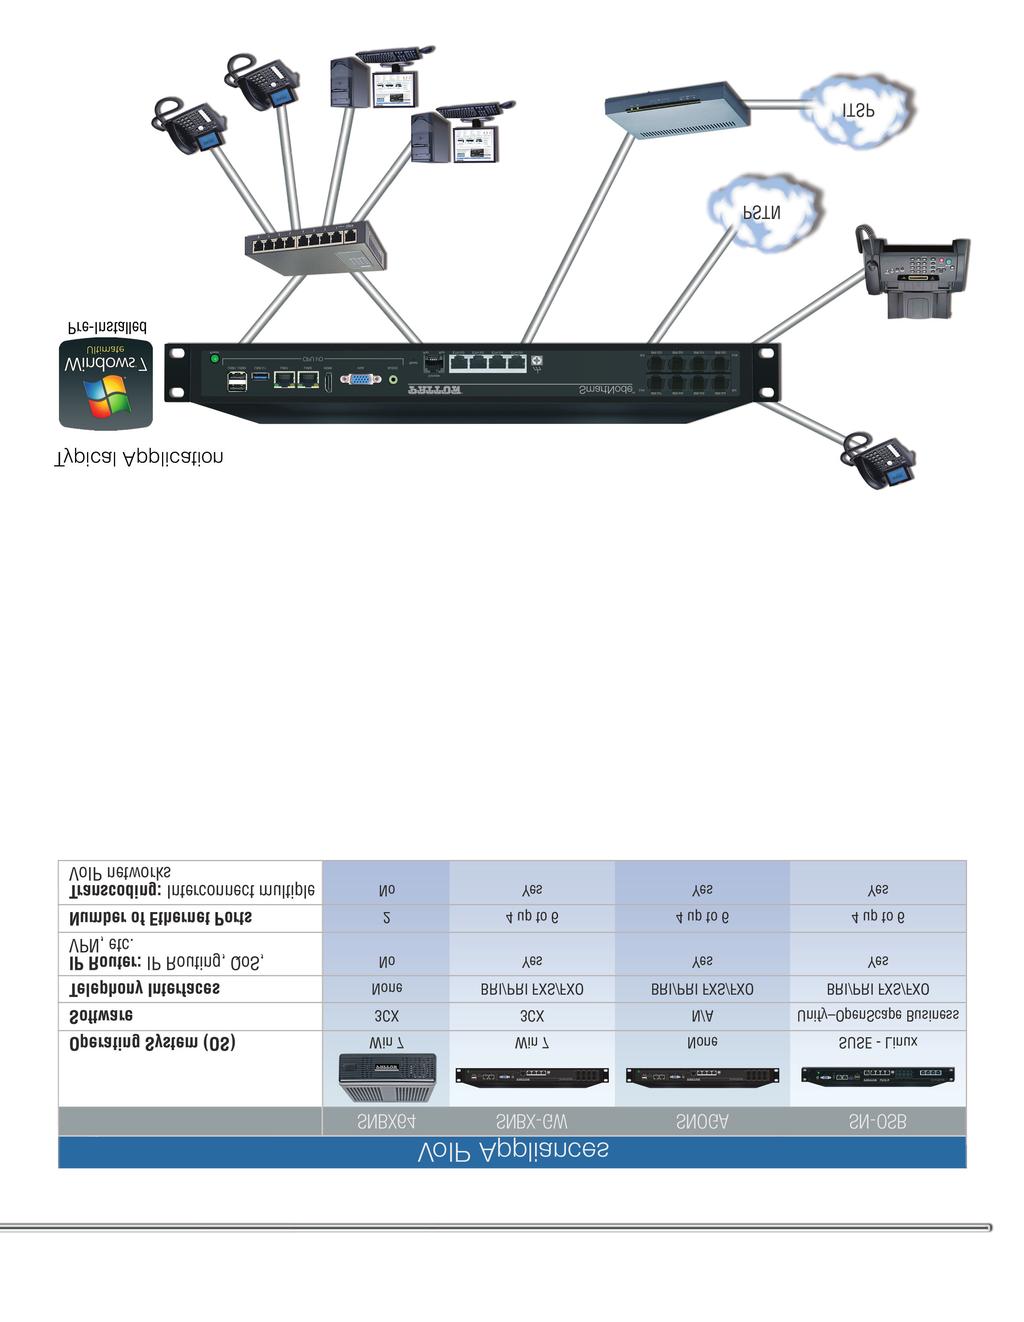 VoIP Appliance with Embedded Windows Patton s SmartNode Branch Exchange (SNBX-GW) with Integrated VoIP Gateway is a convenient one box solution.